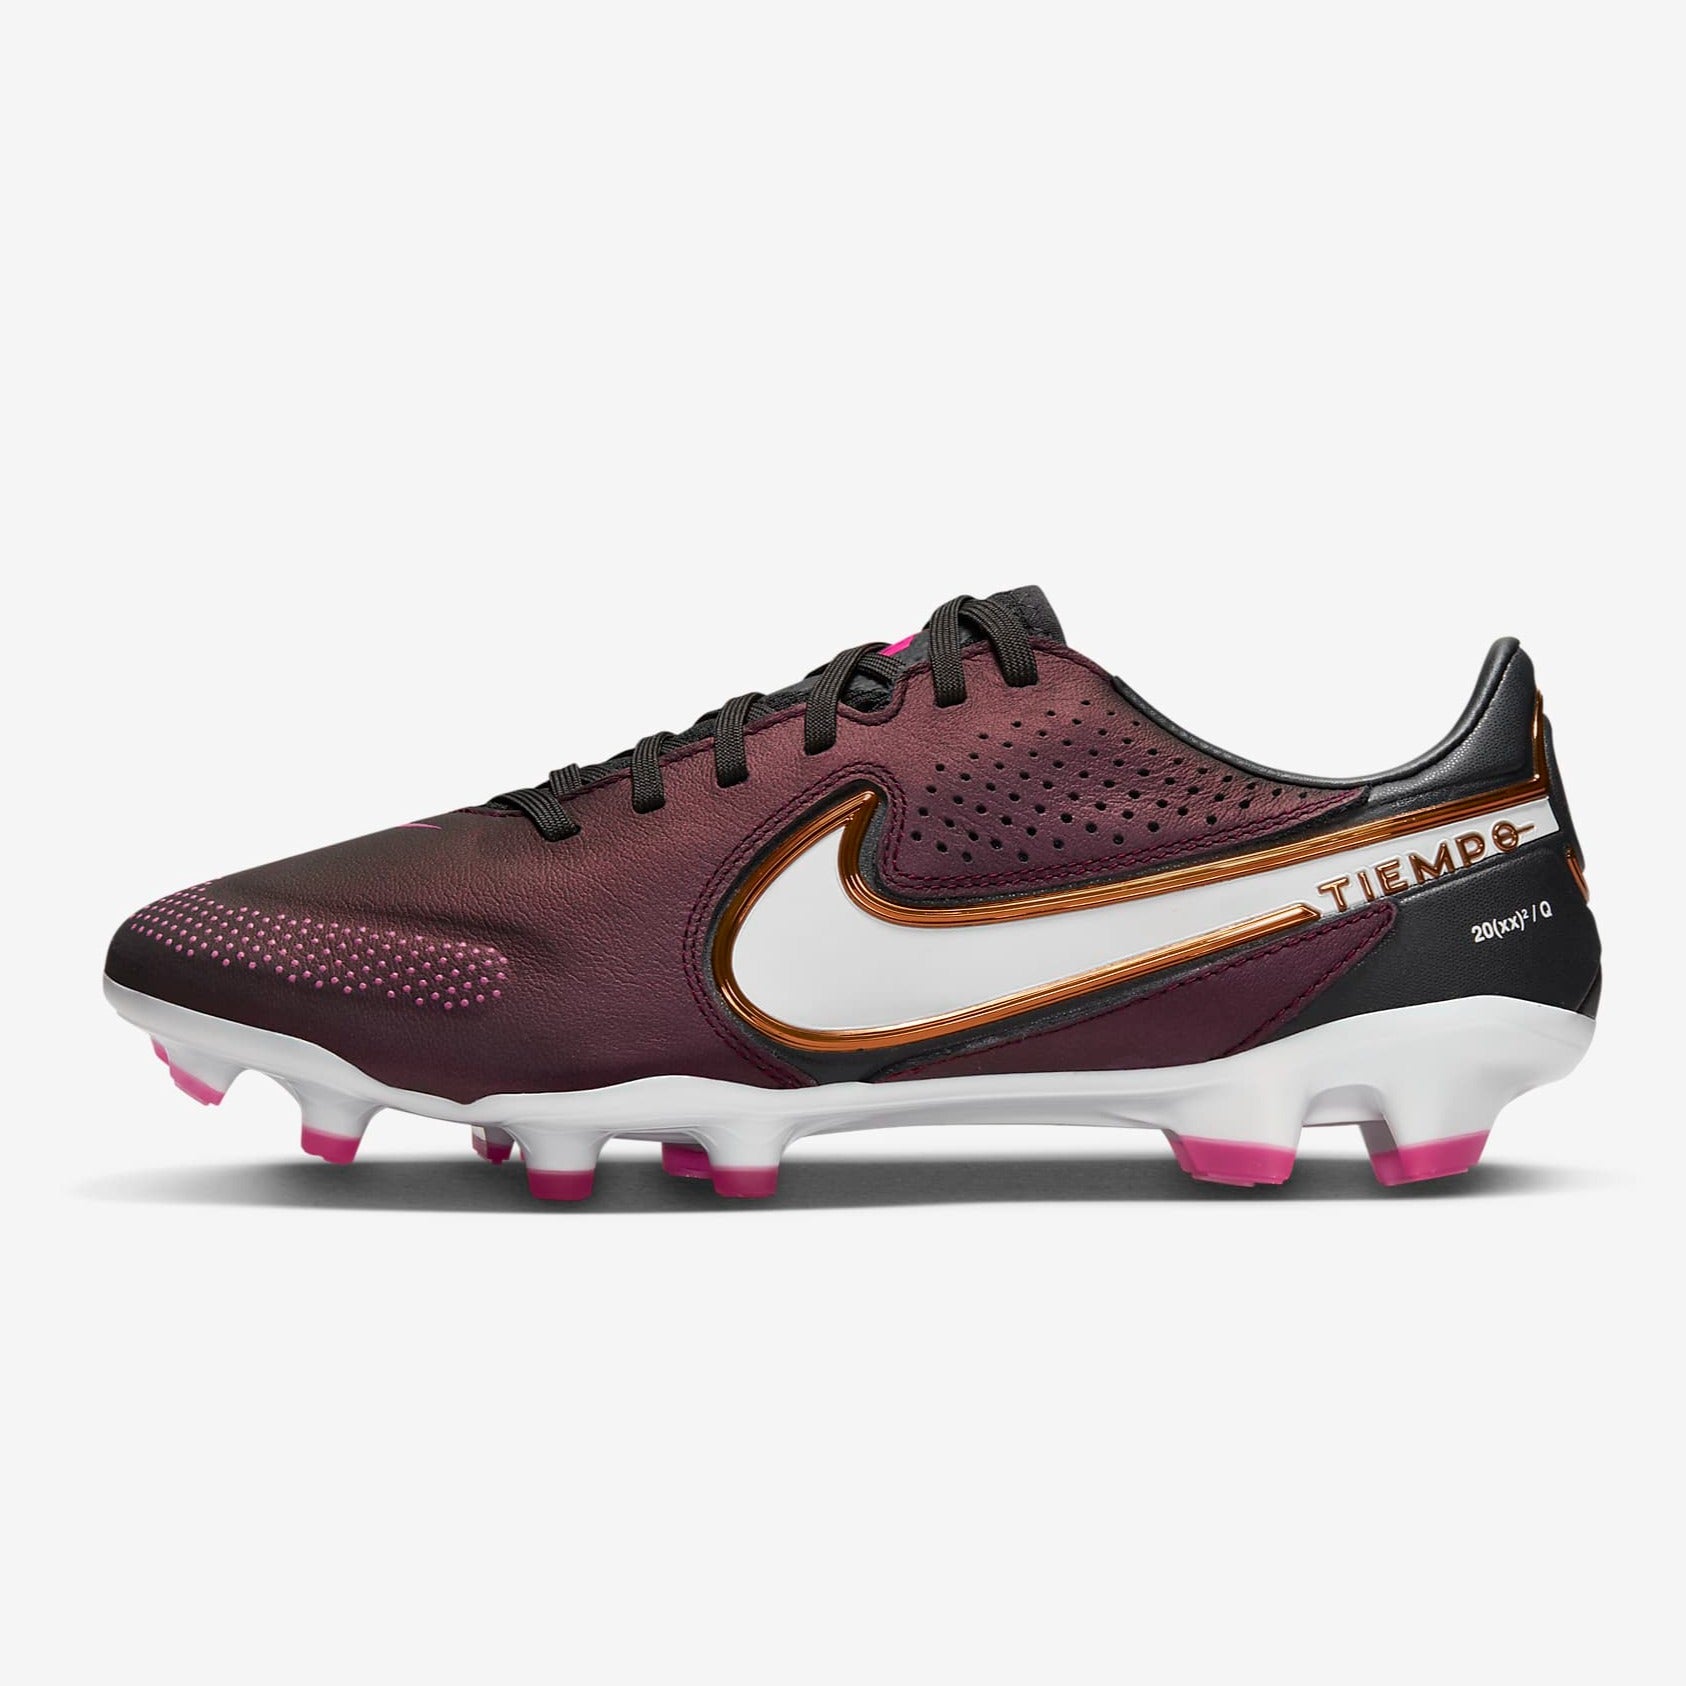 Nike Tiempo Legend 9 Pro FG Firm-Ground Soccer Cleats